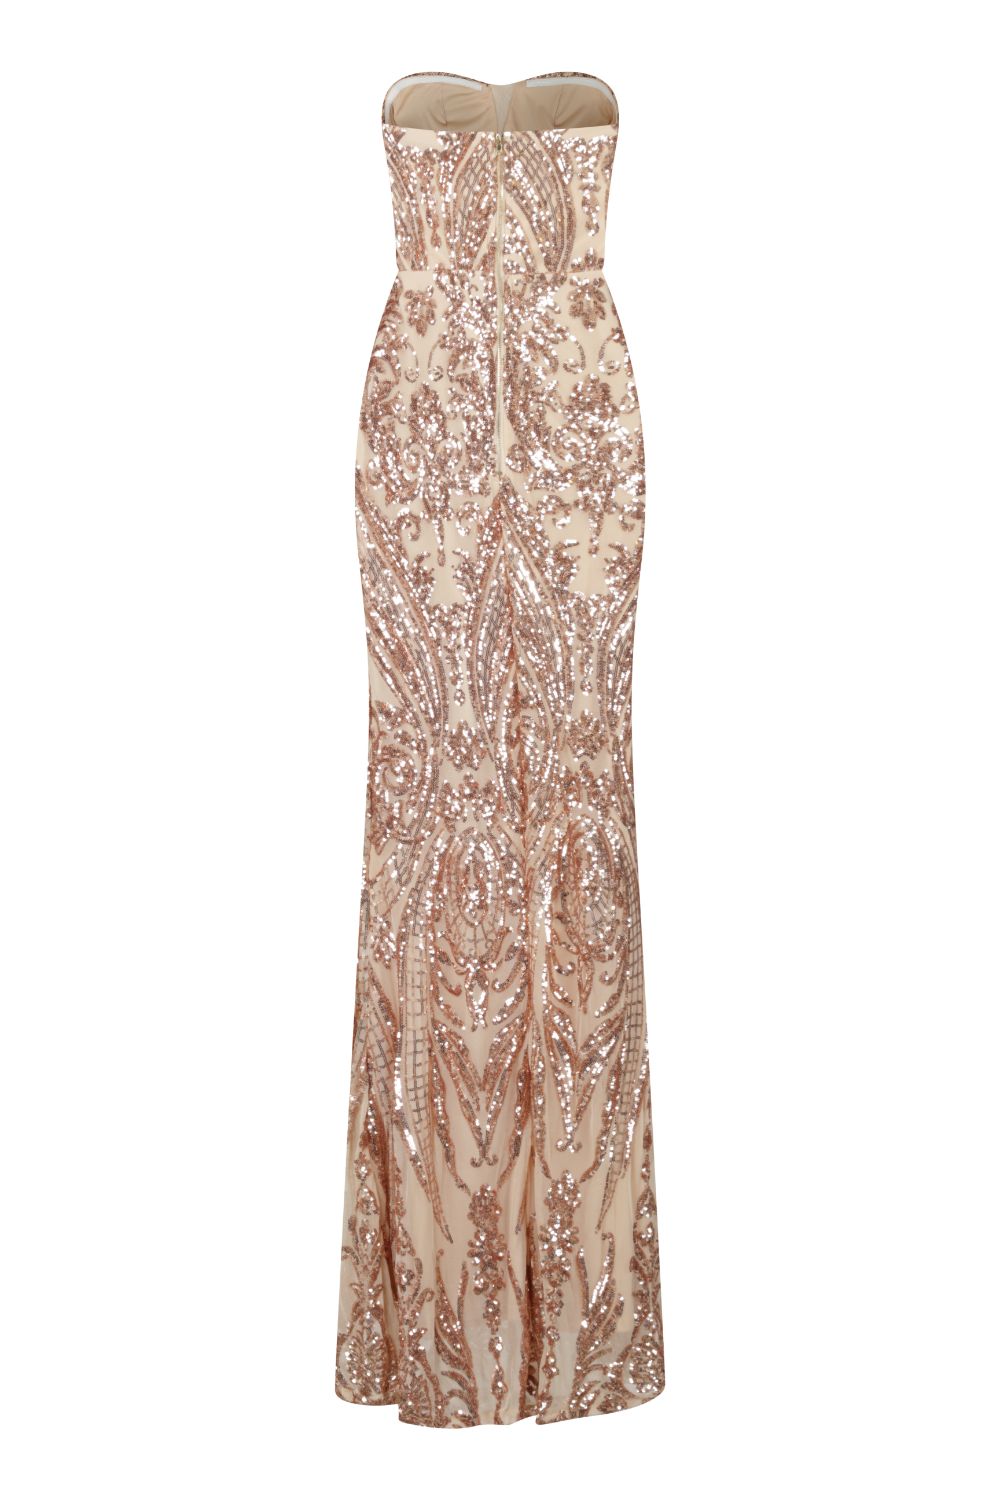 Kingdom Gold Luxe Sweetheart Mesh Plunge Sequin Fishtail Maxi Dress